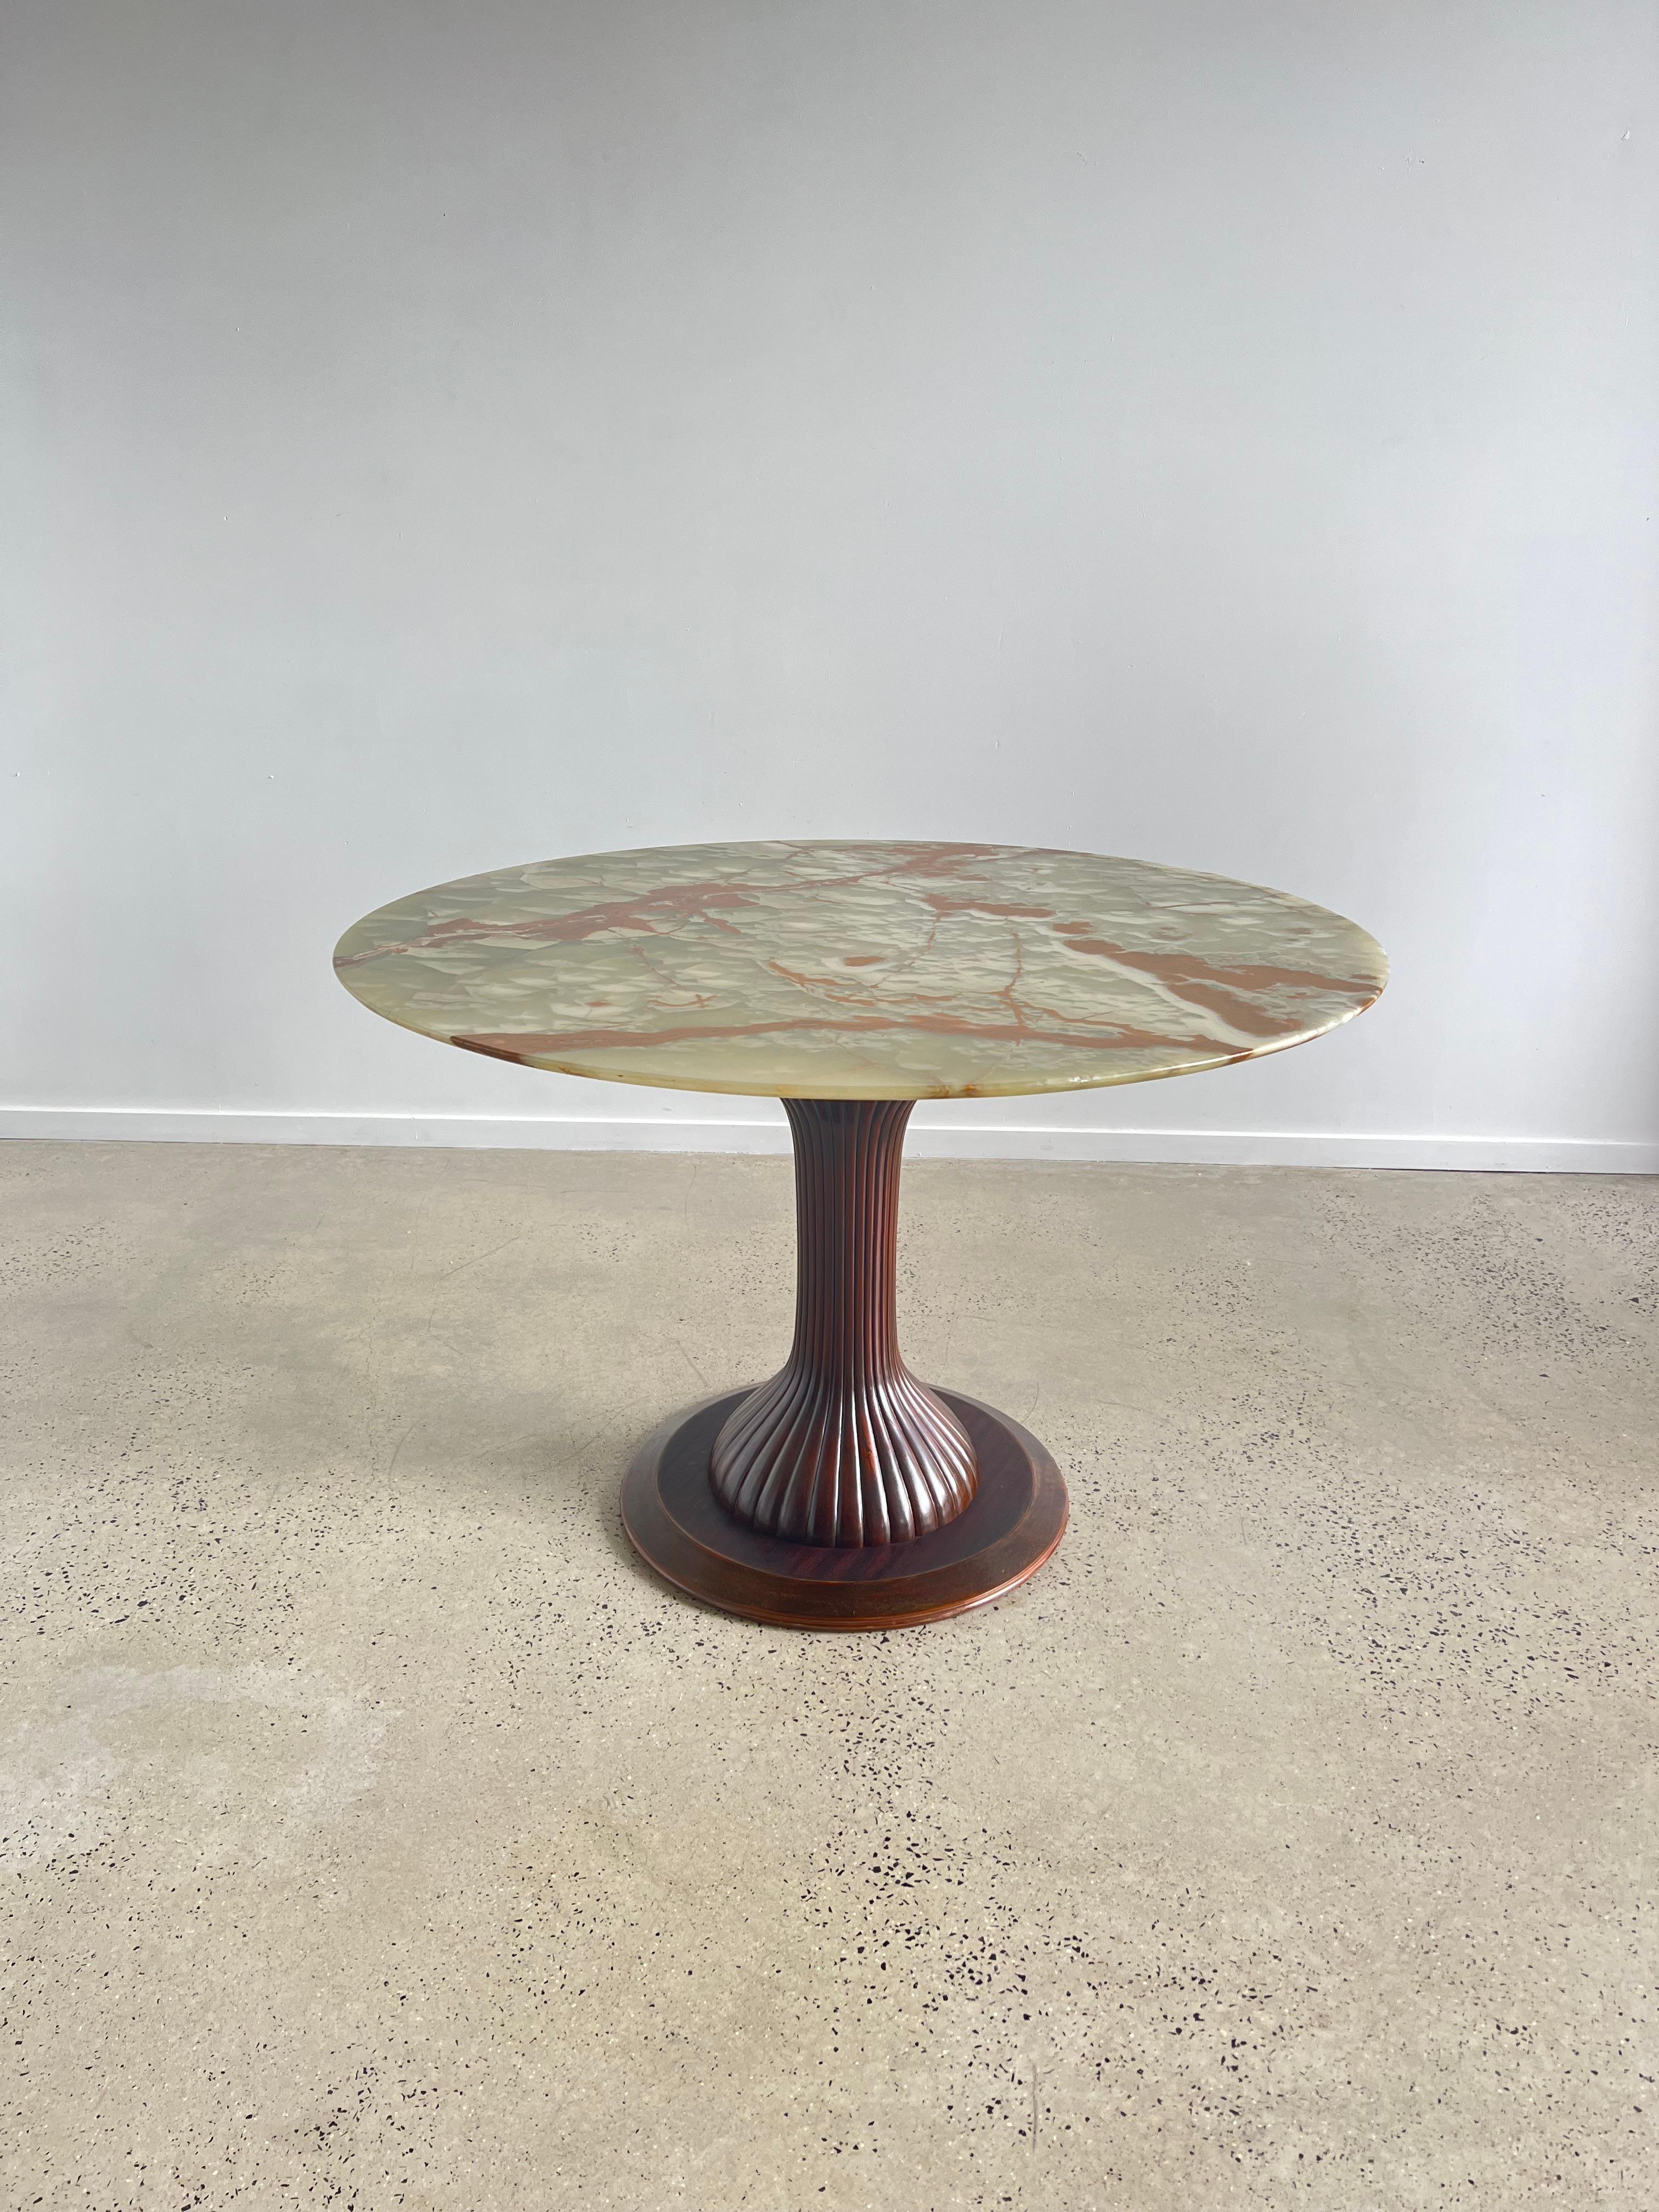 Osvaldo Borsani Italian 1950's Dining or Center Table. An Osvaldo Borsani tulip shaped dining table or center table. Designed for Arredamento Borsani, Italy, 1950s. The tulip shaped mahogany base is elegantly carved and fluted, with a marble